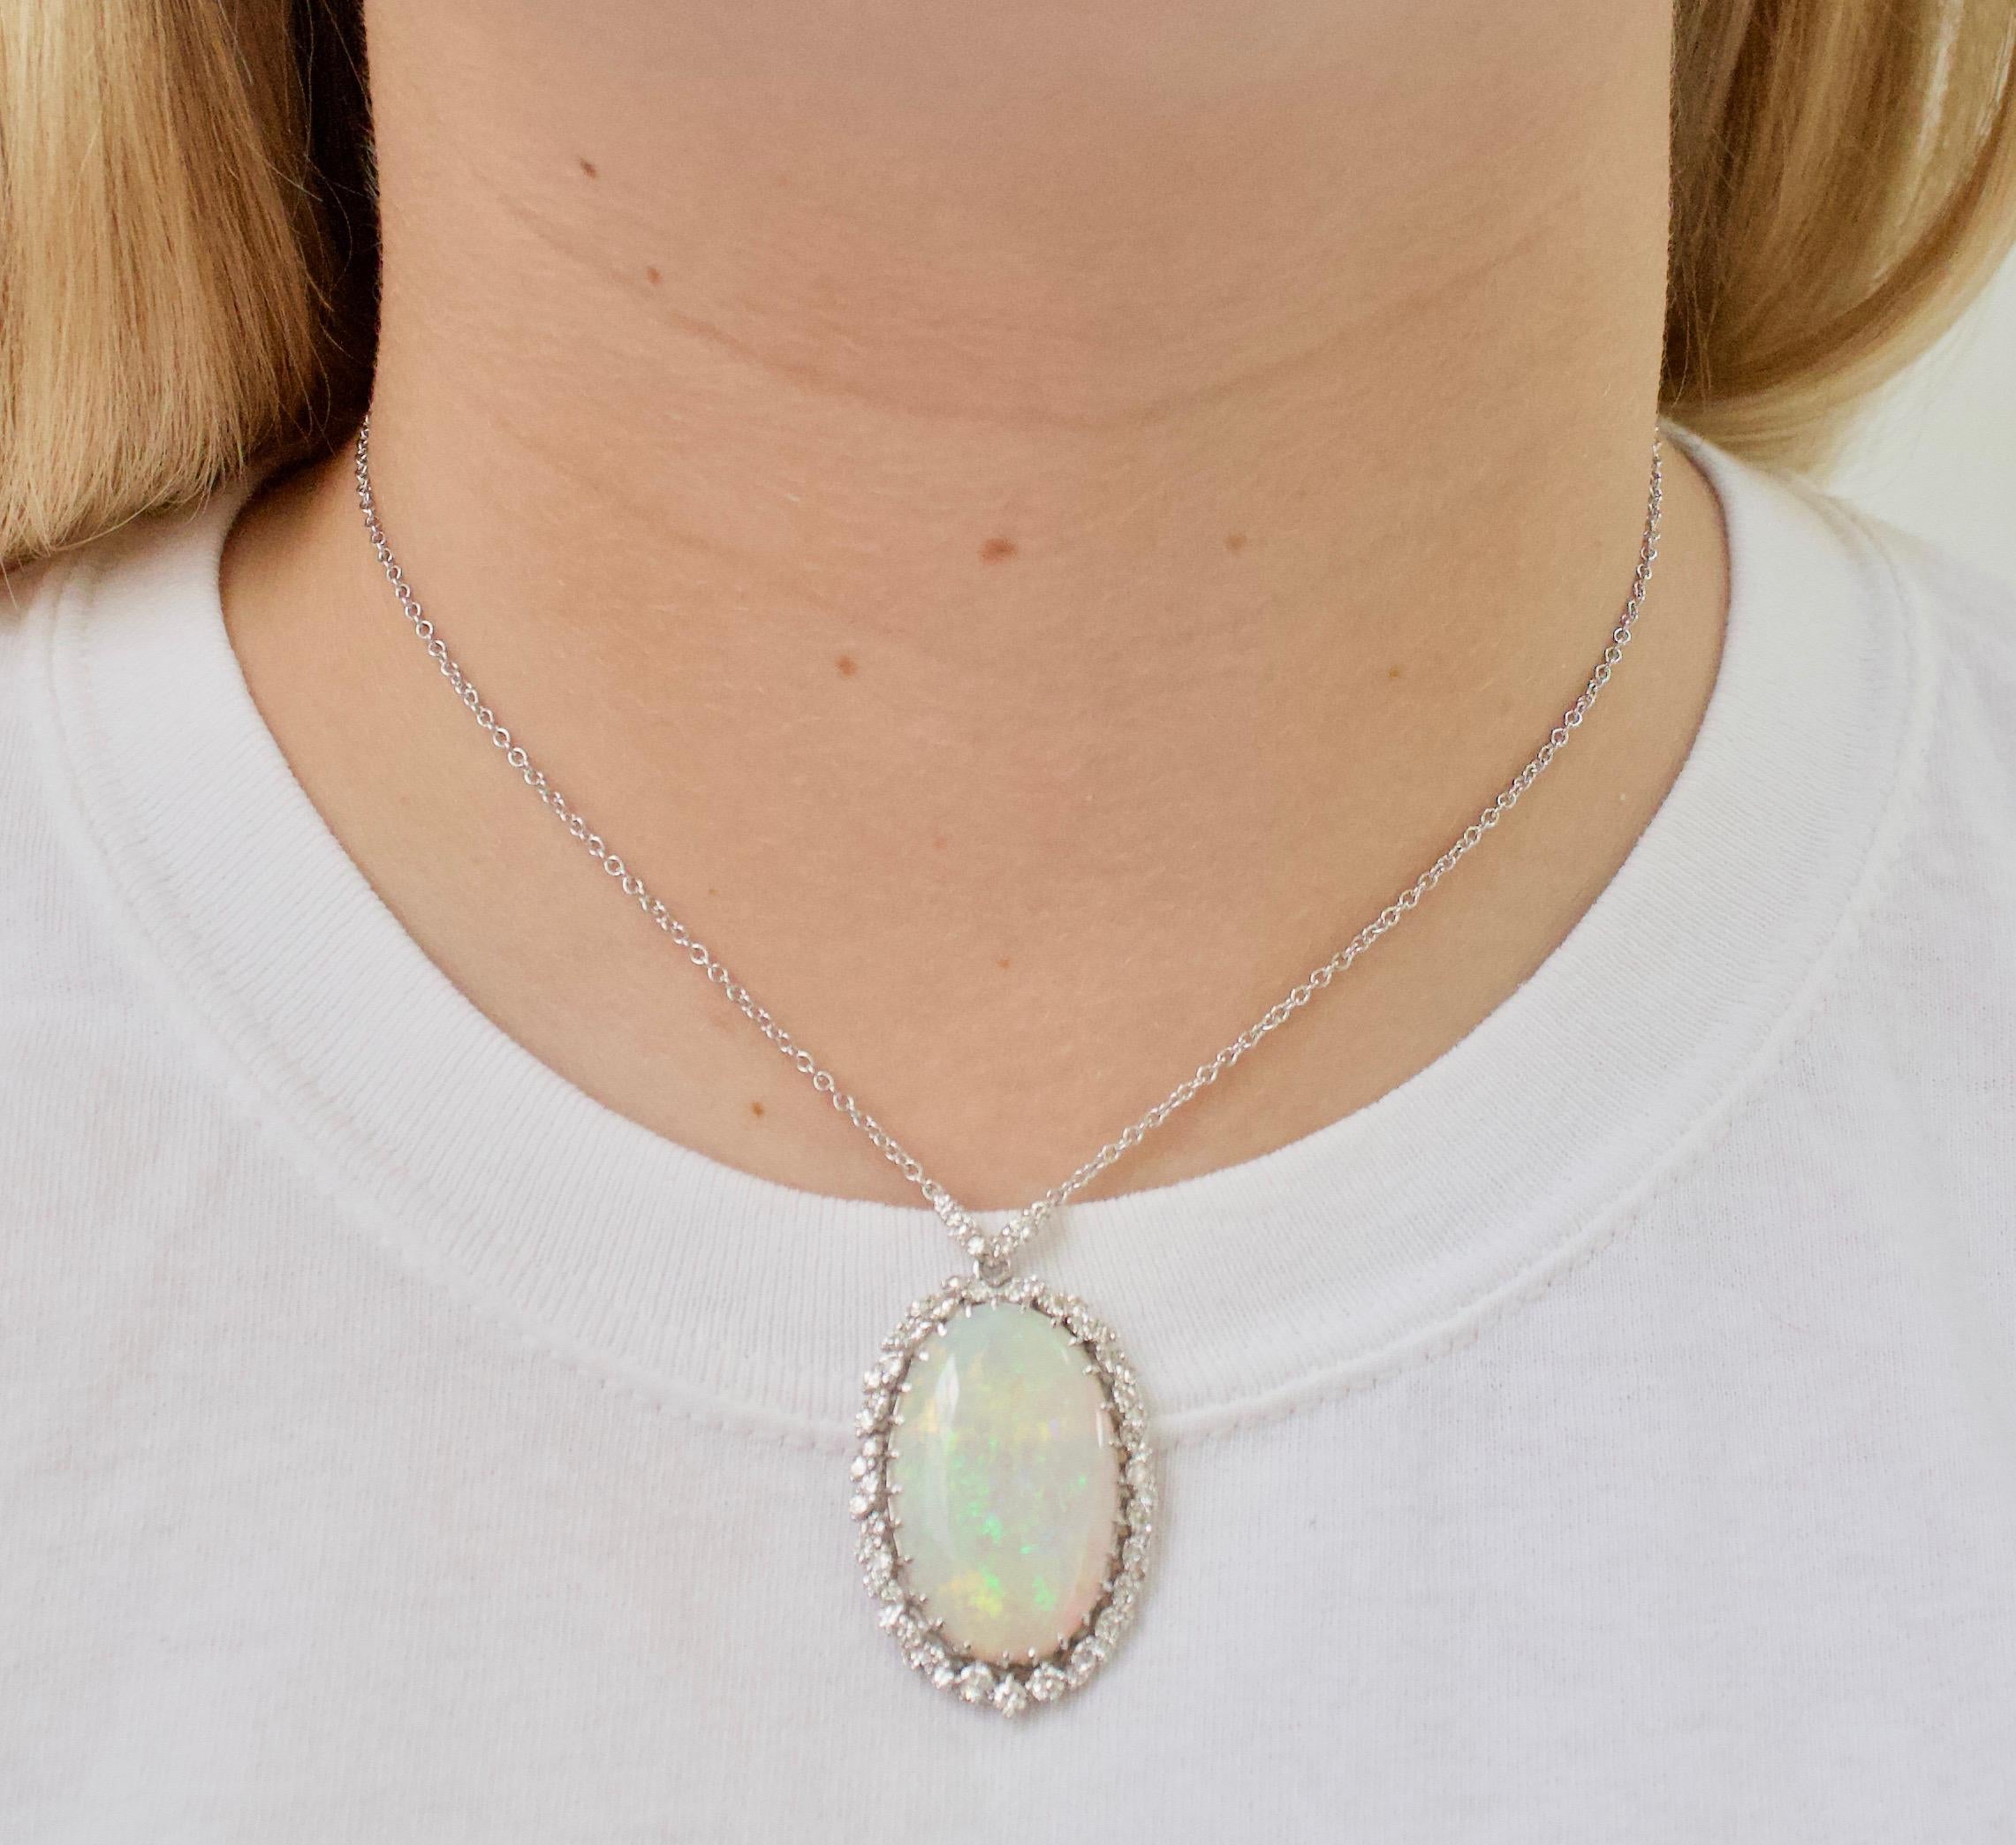 Opal and Diamond Vintage Necklace  in 18k Gold Circa 1960's
Purchased From a Los Angeles Family's Estate
Features a Beautiful 14.00 carat (approximately) Natural Opal. Translucent with Green, Blue and Yellow Plays of Color.  
57 Round Brilliant Cut